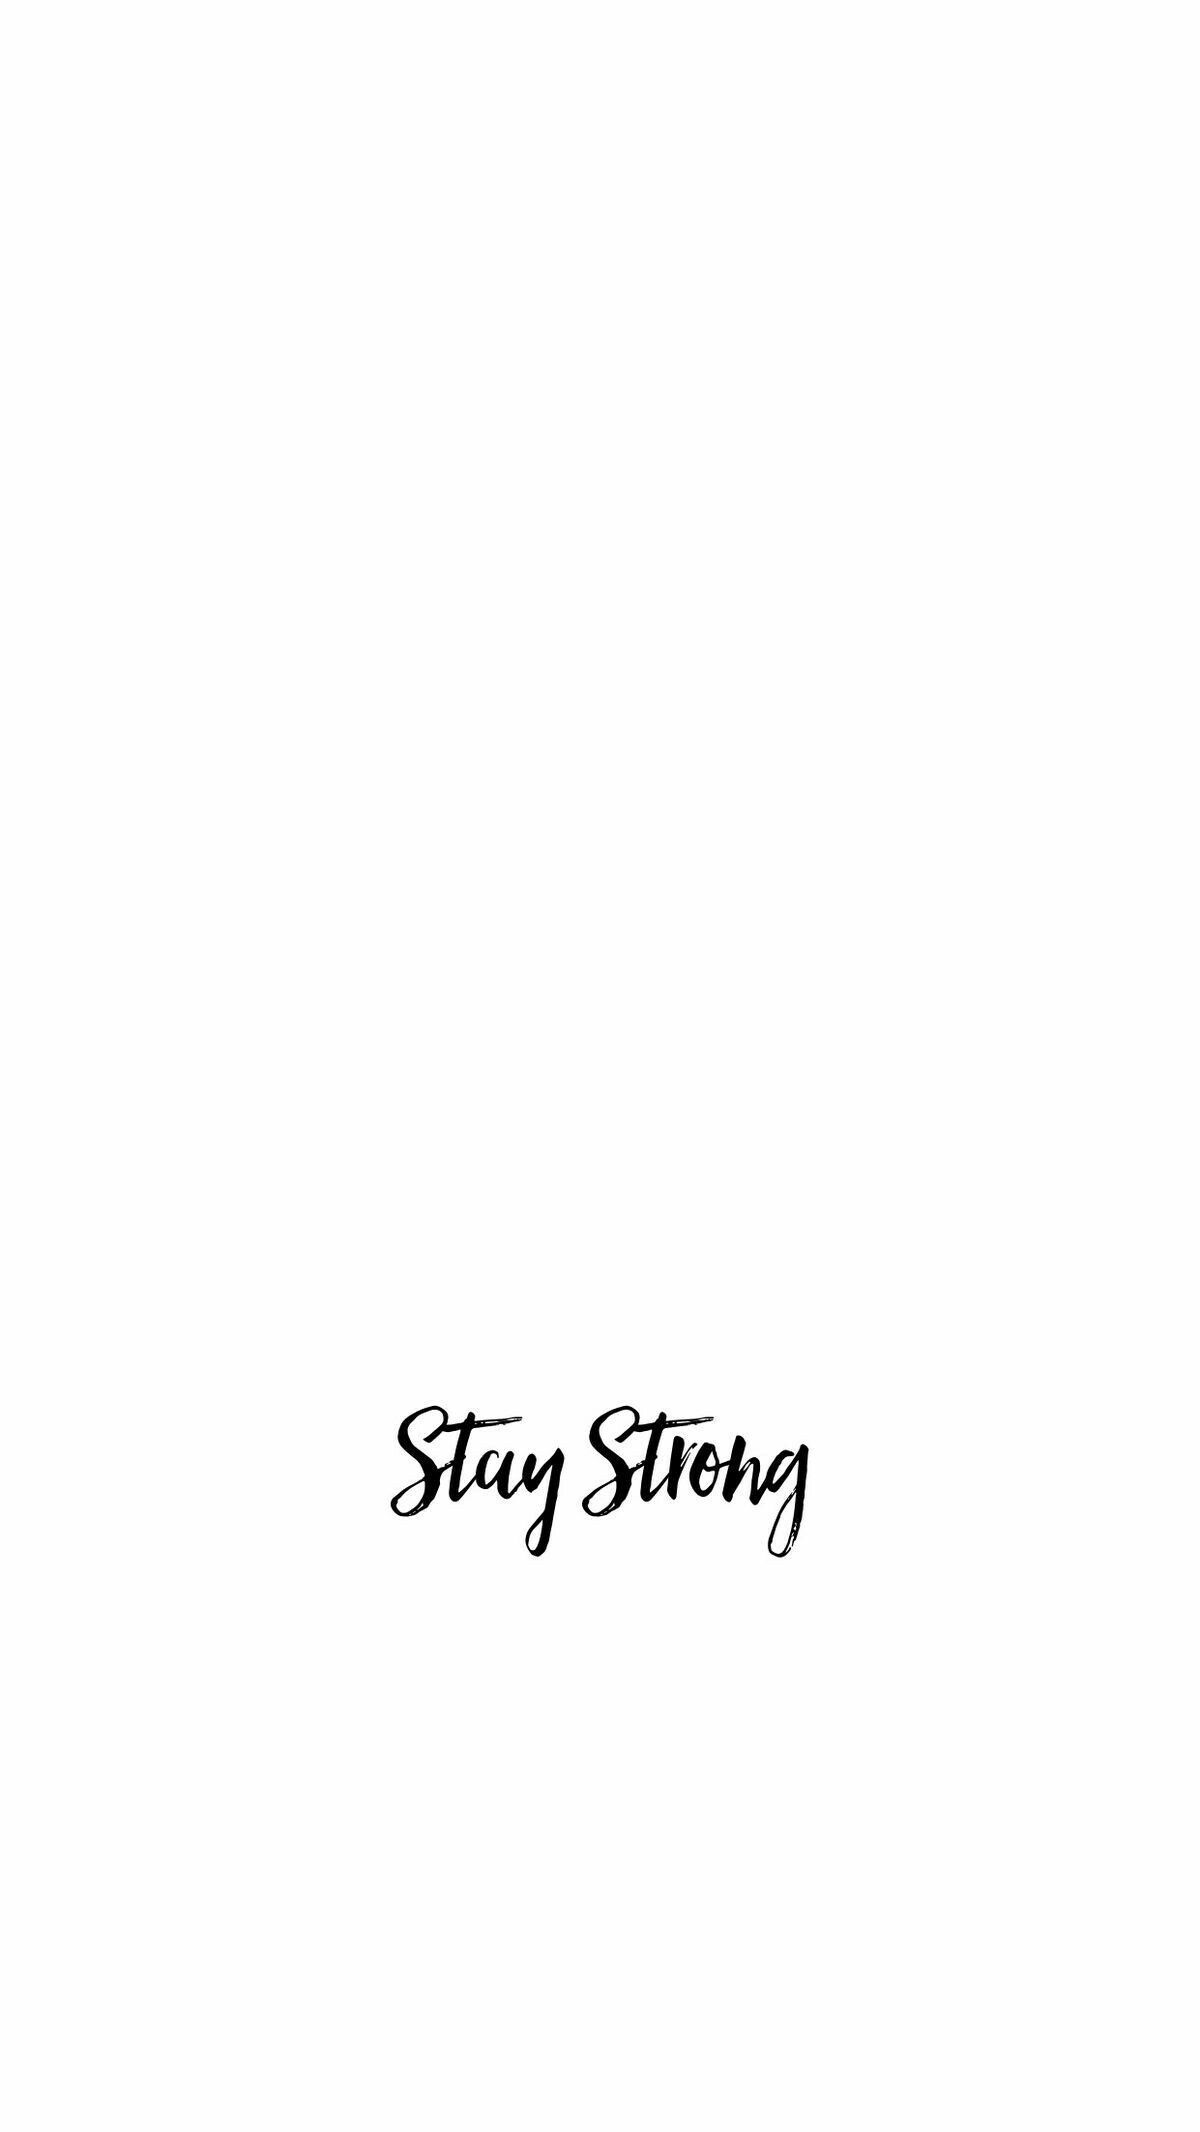 Stay Strong Wallpaper Free Stay .wallpaperaccess.com